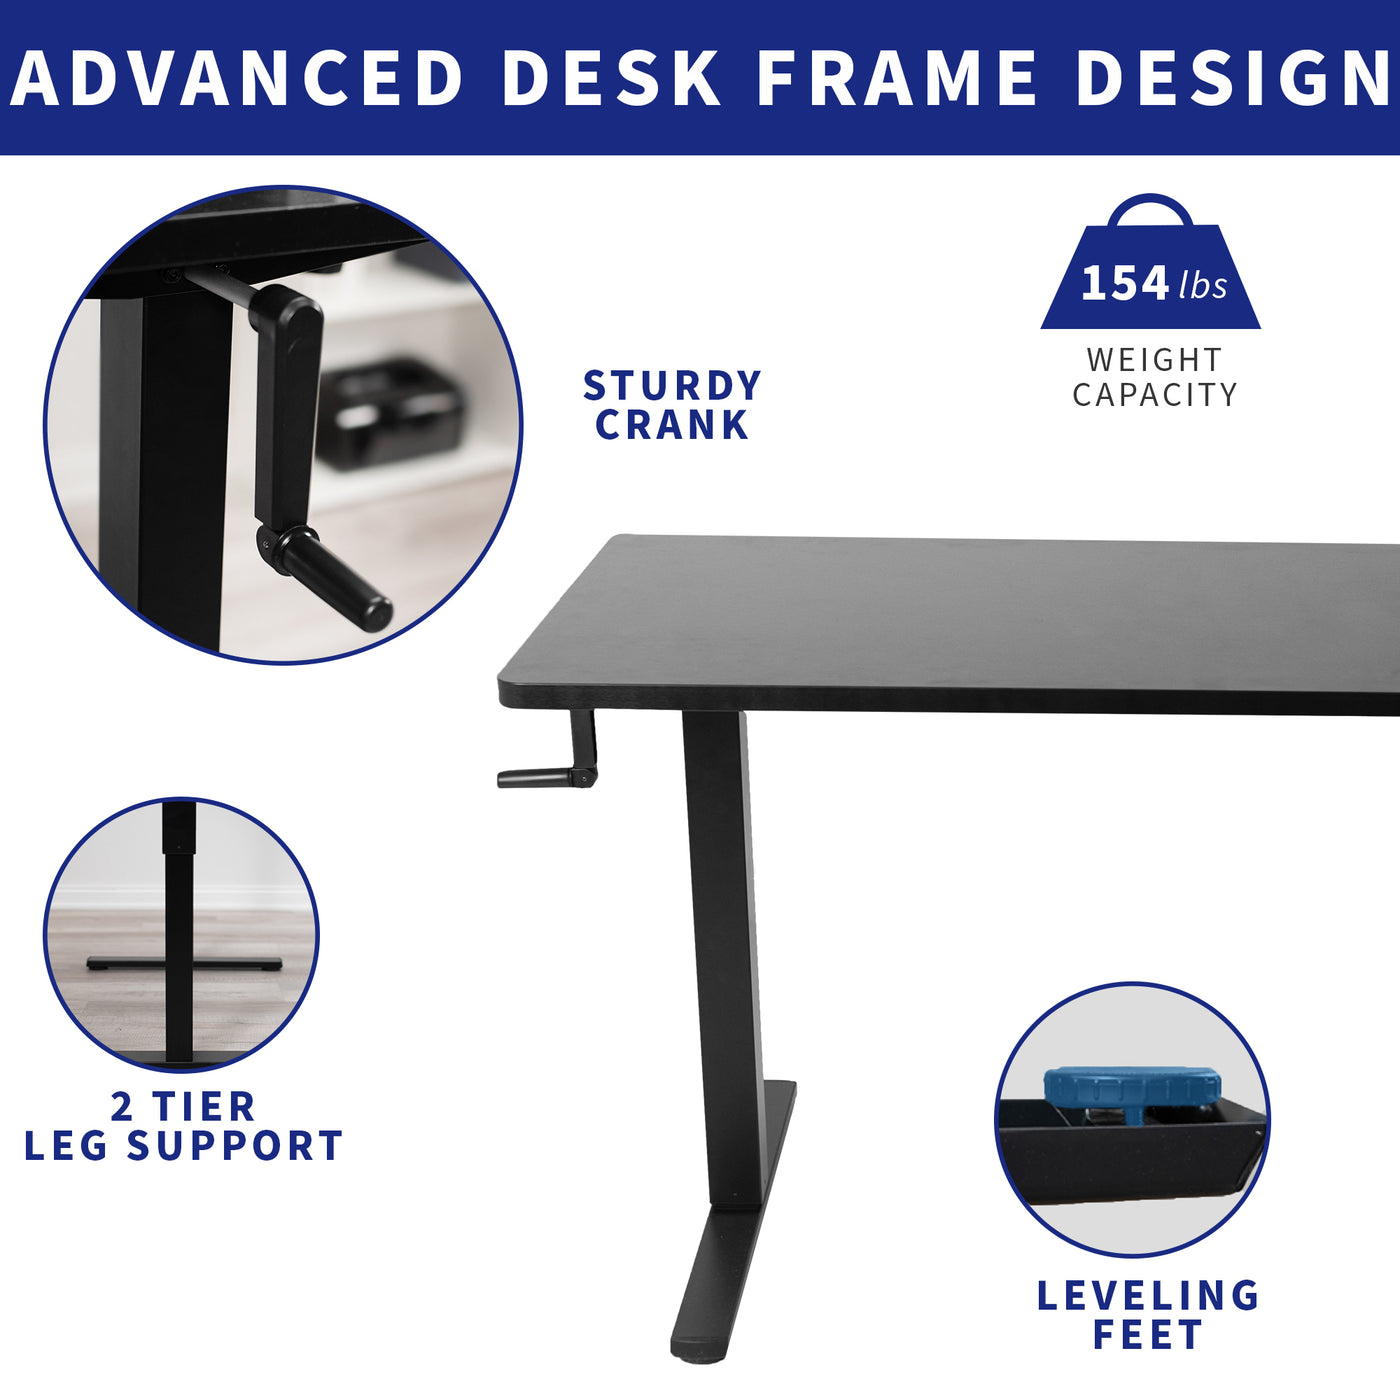 Advanced sturdy steel design with leveling feet and strong legs for maximum desk support. 